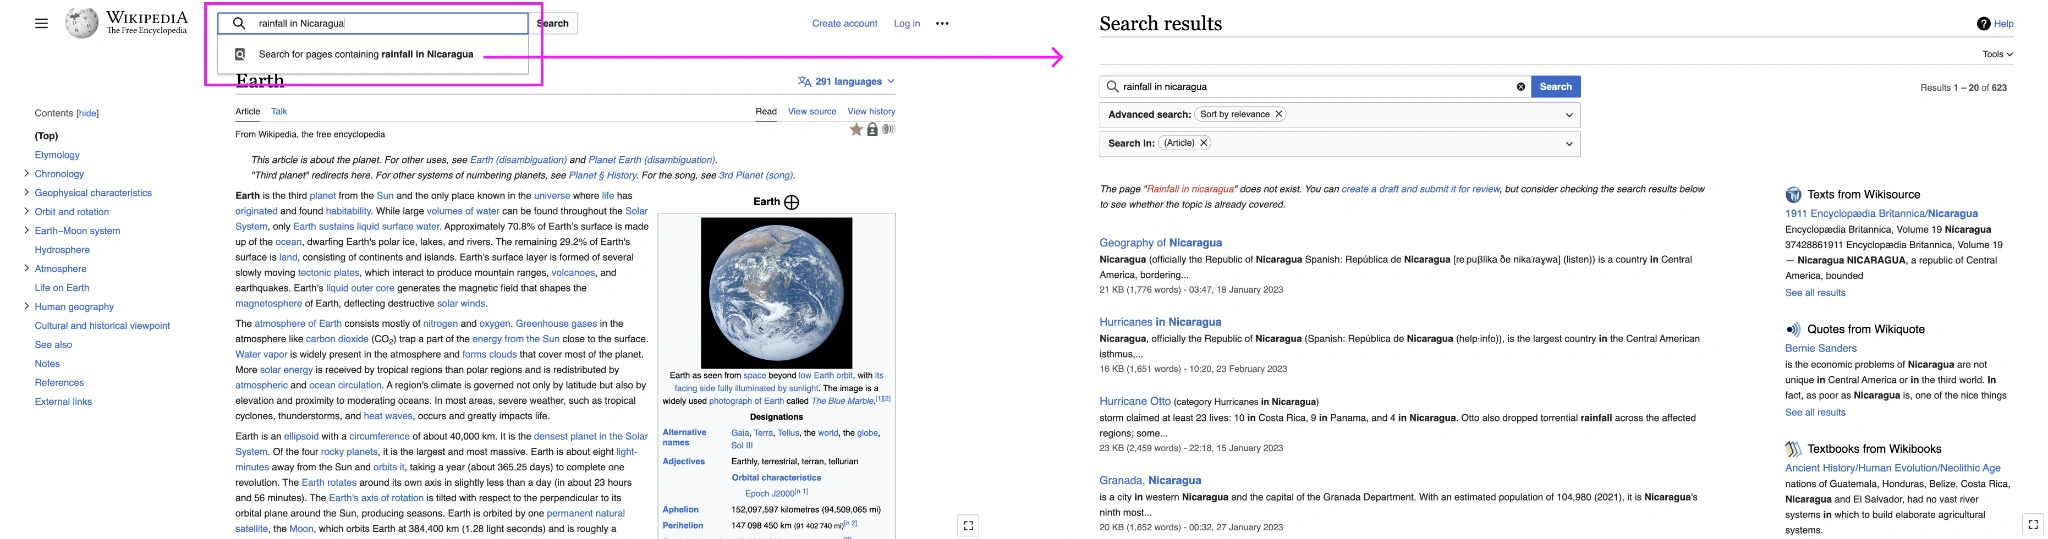 Screenshot of Wikipedia showing link to search page from the search bar and the search page